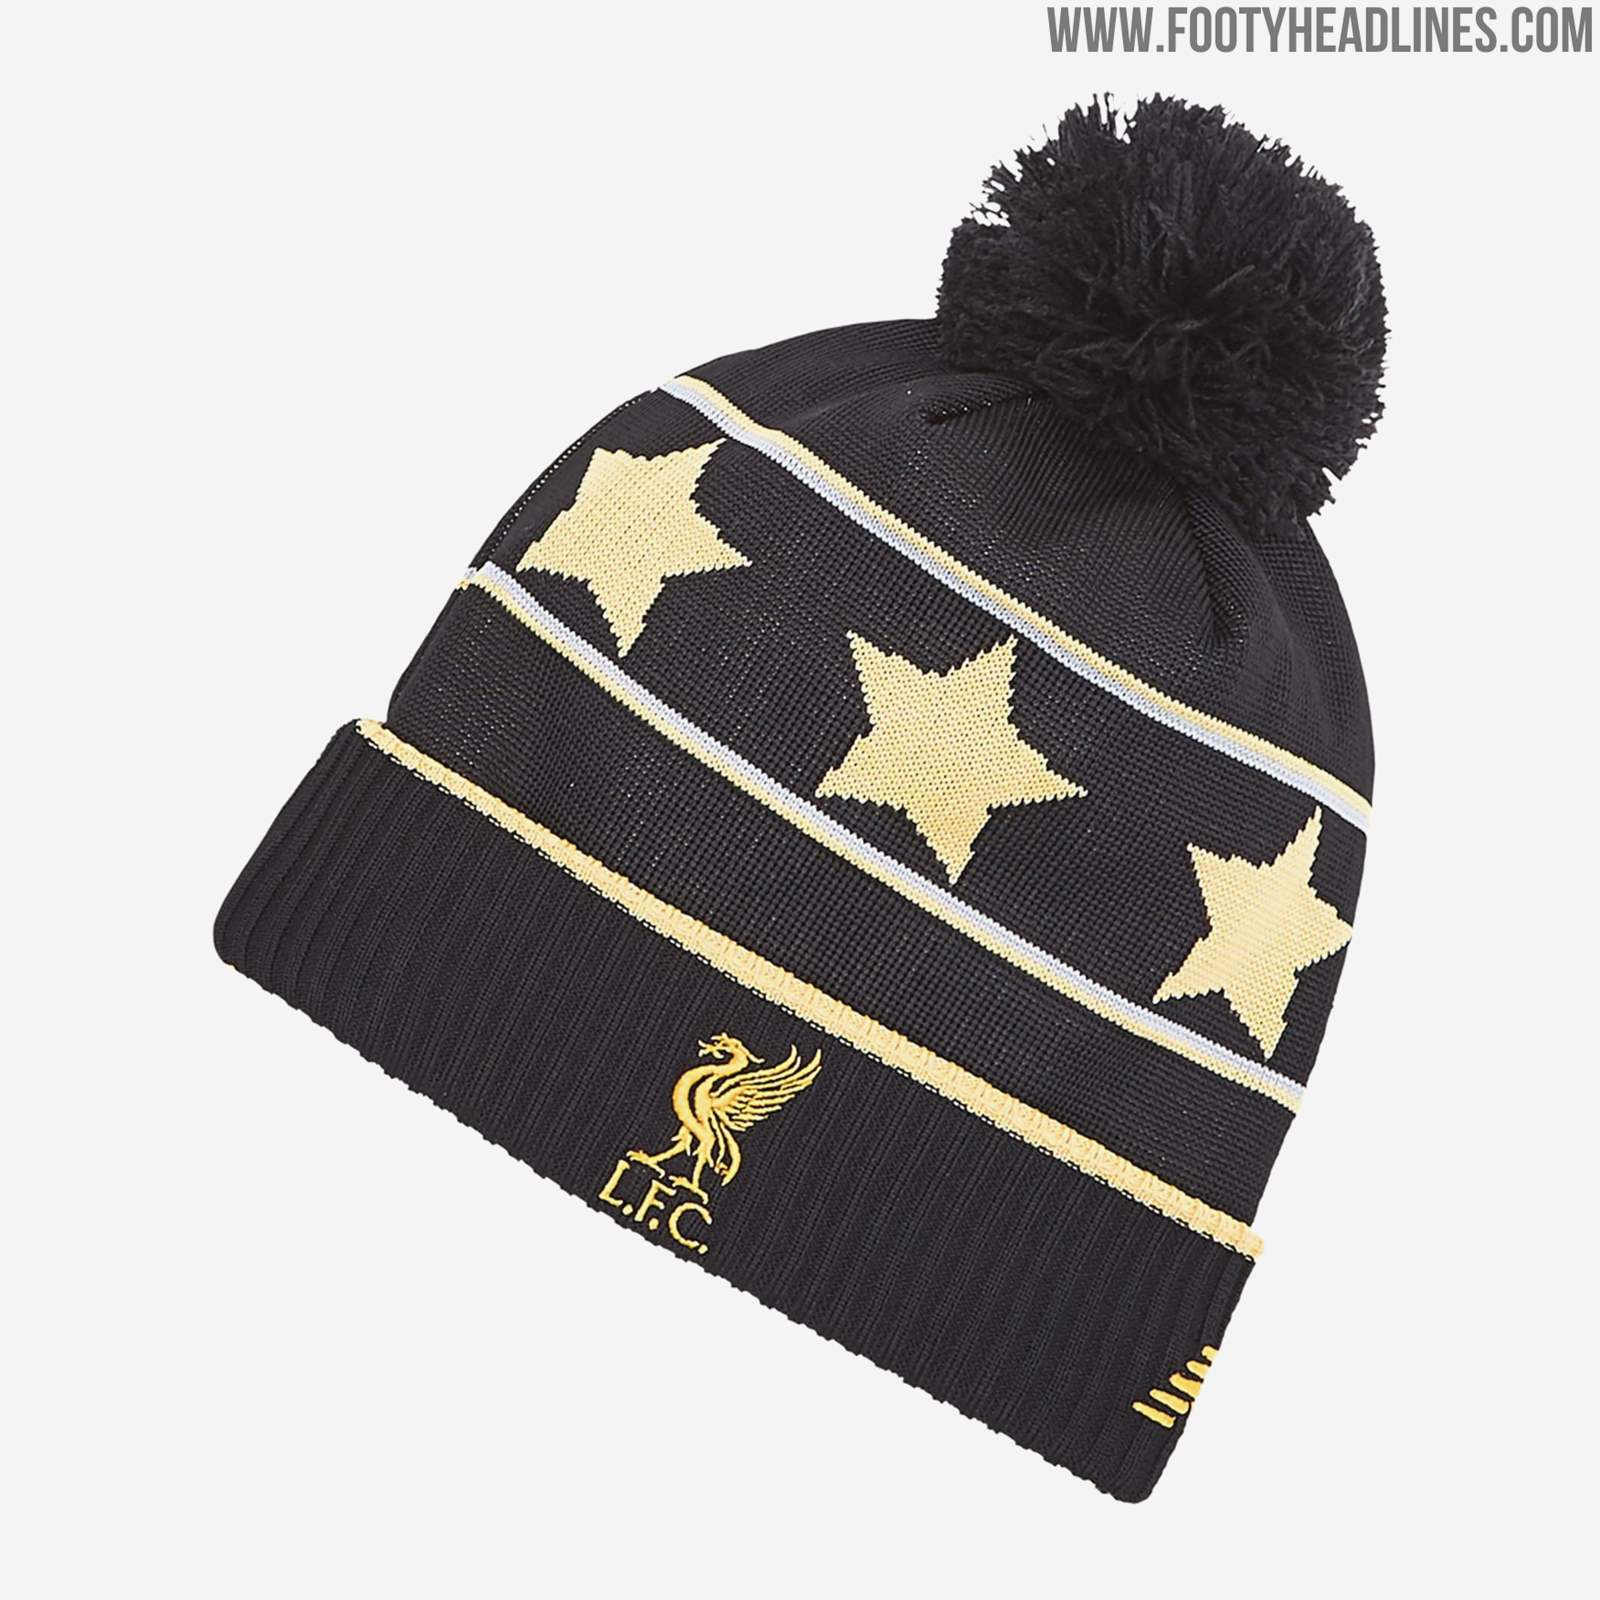 black and gold liverpool shirt